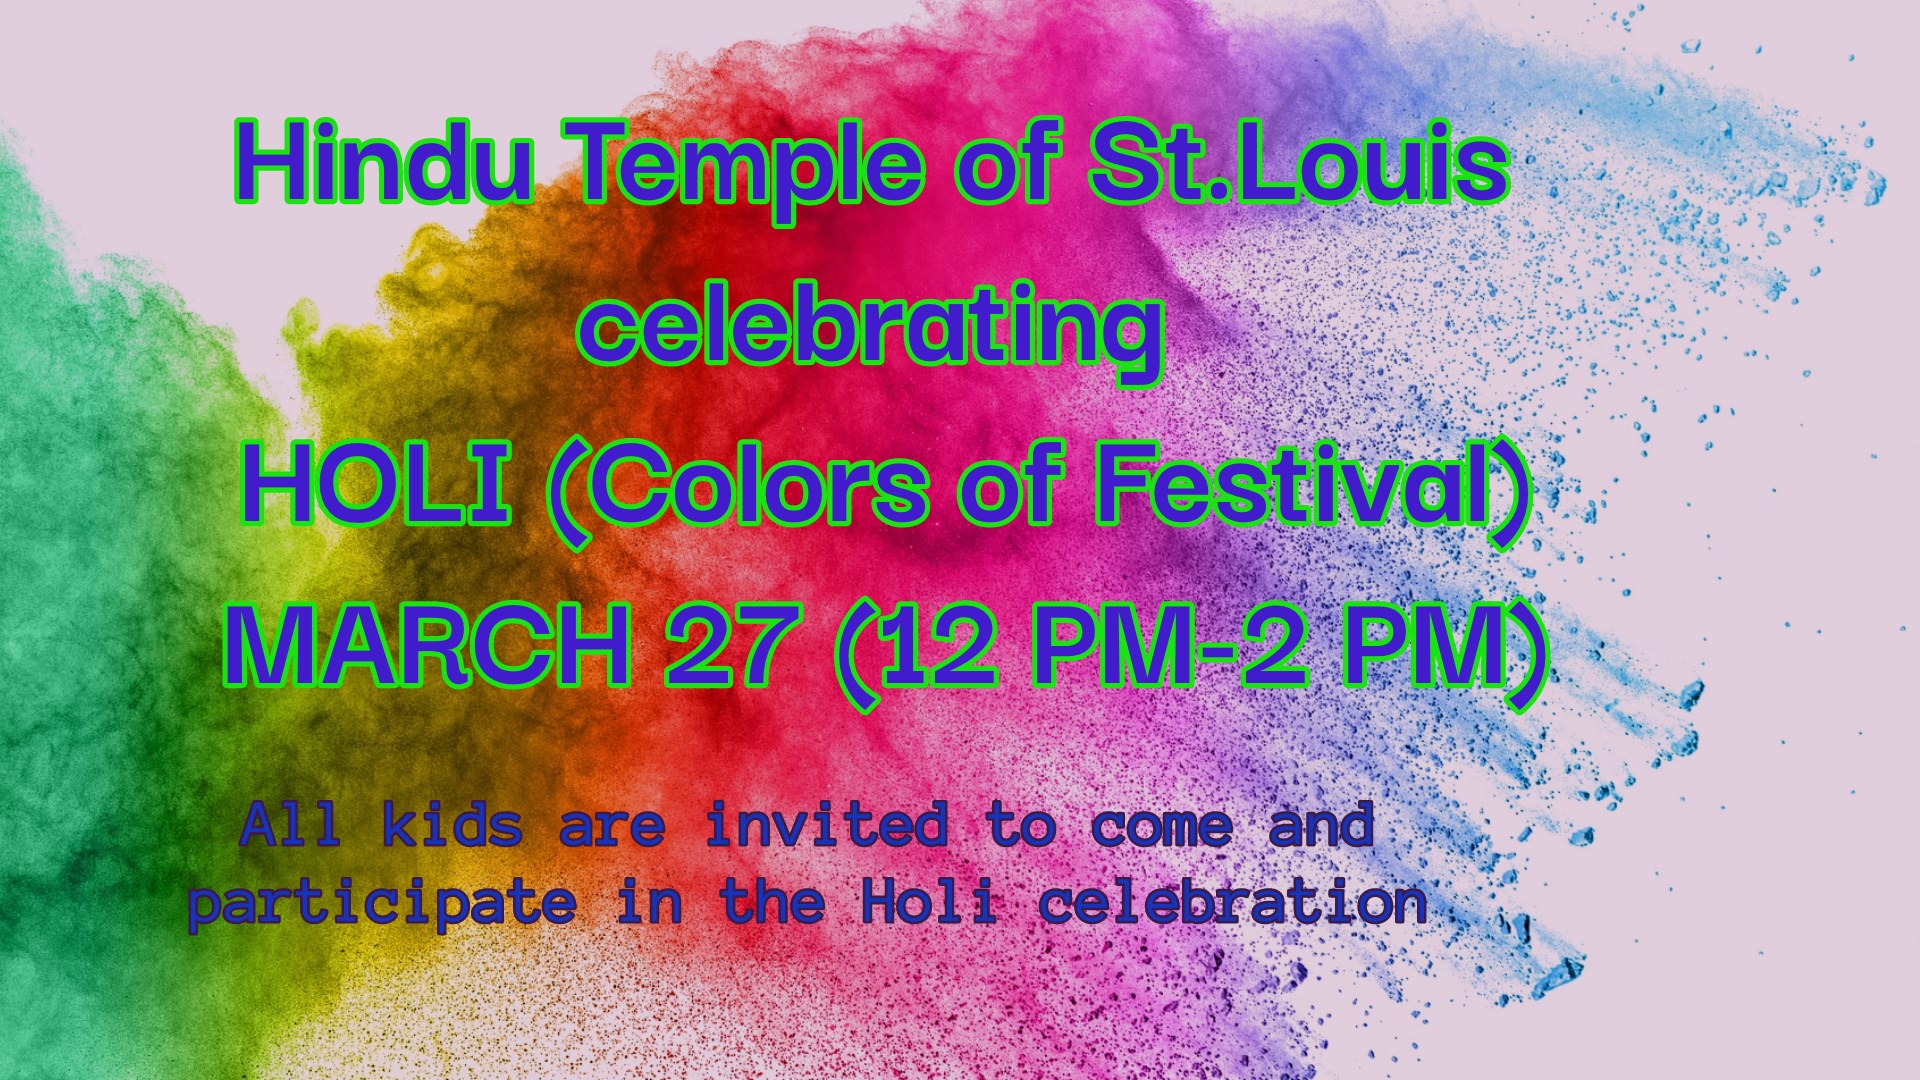 HOLI Celebrations @ 03/27 (from 12PM to 2 PM)